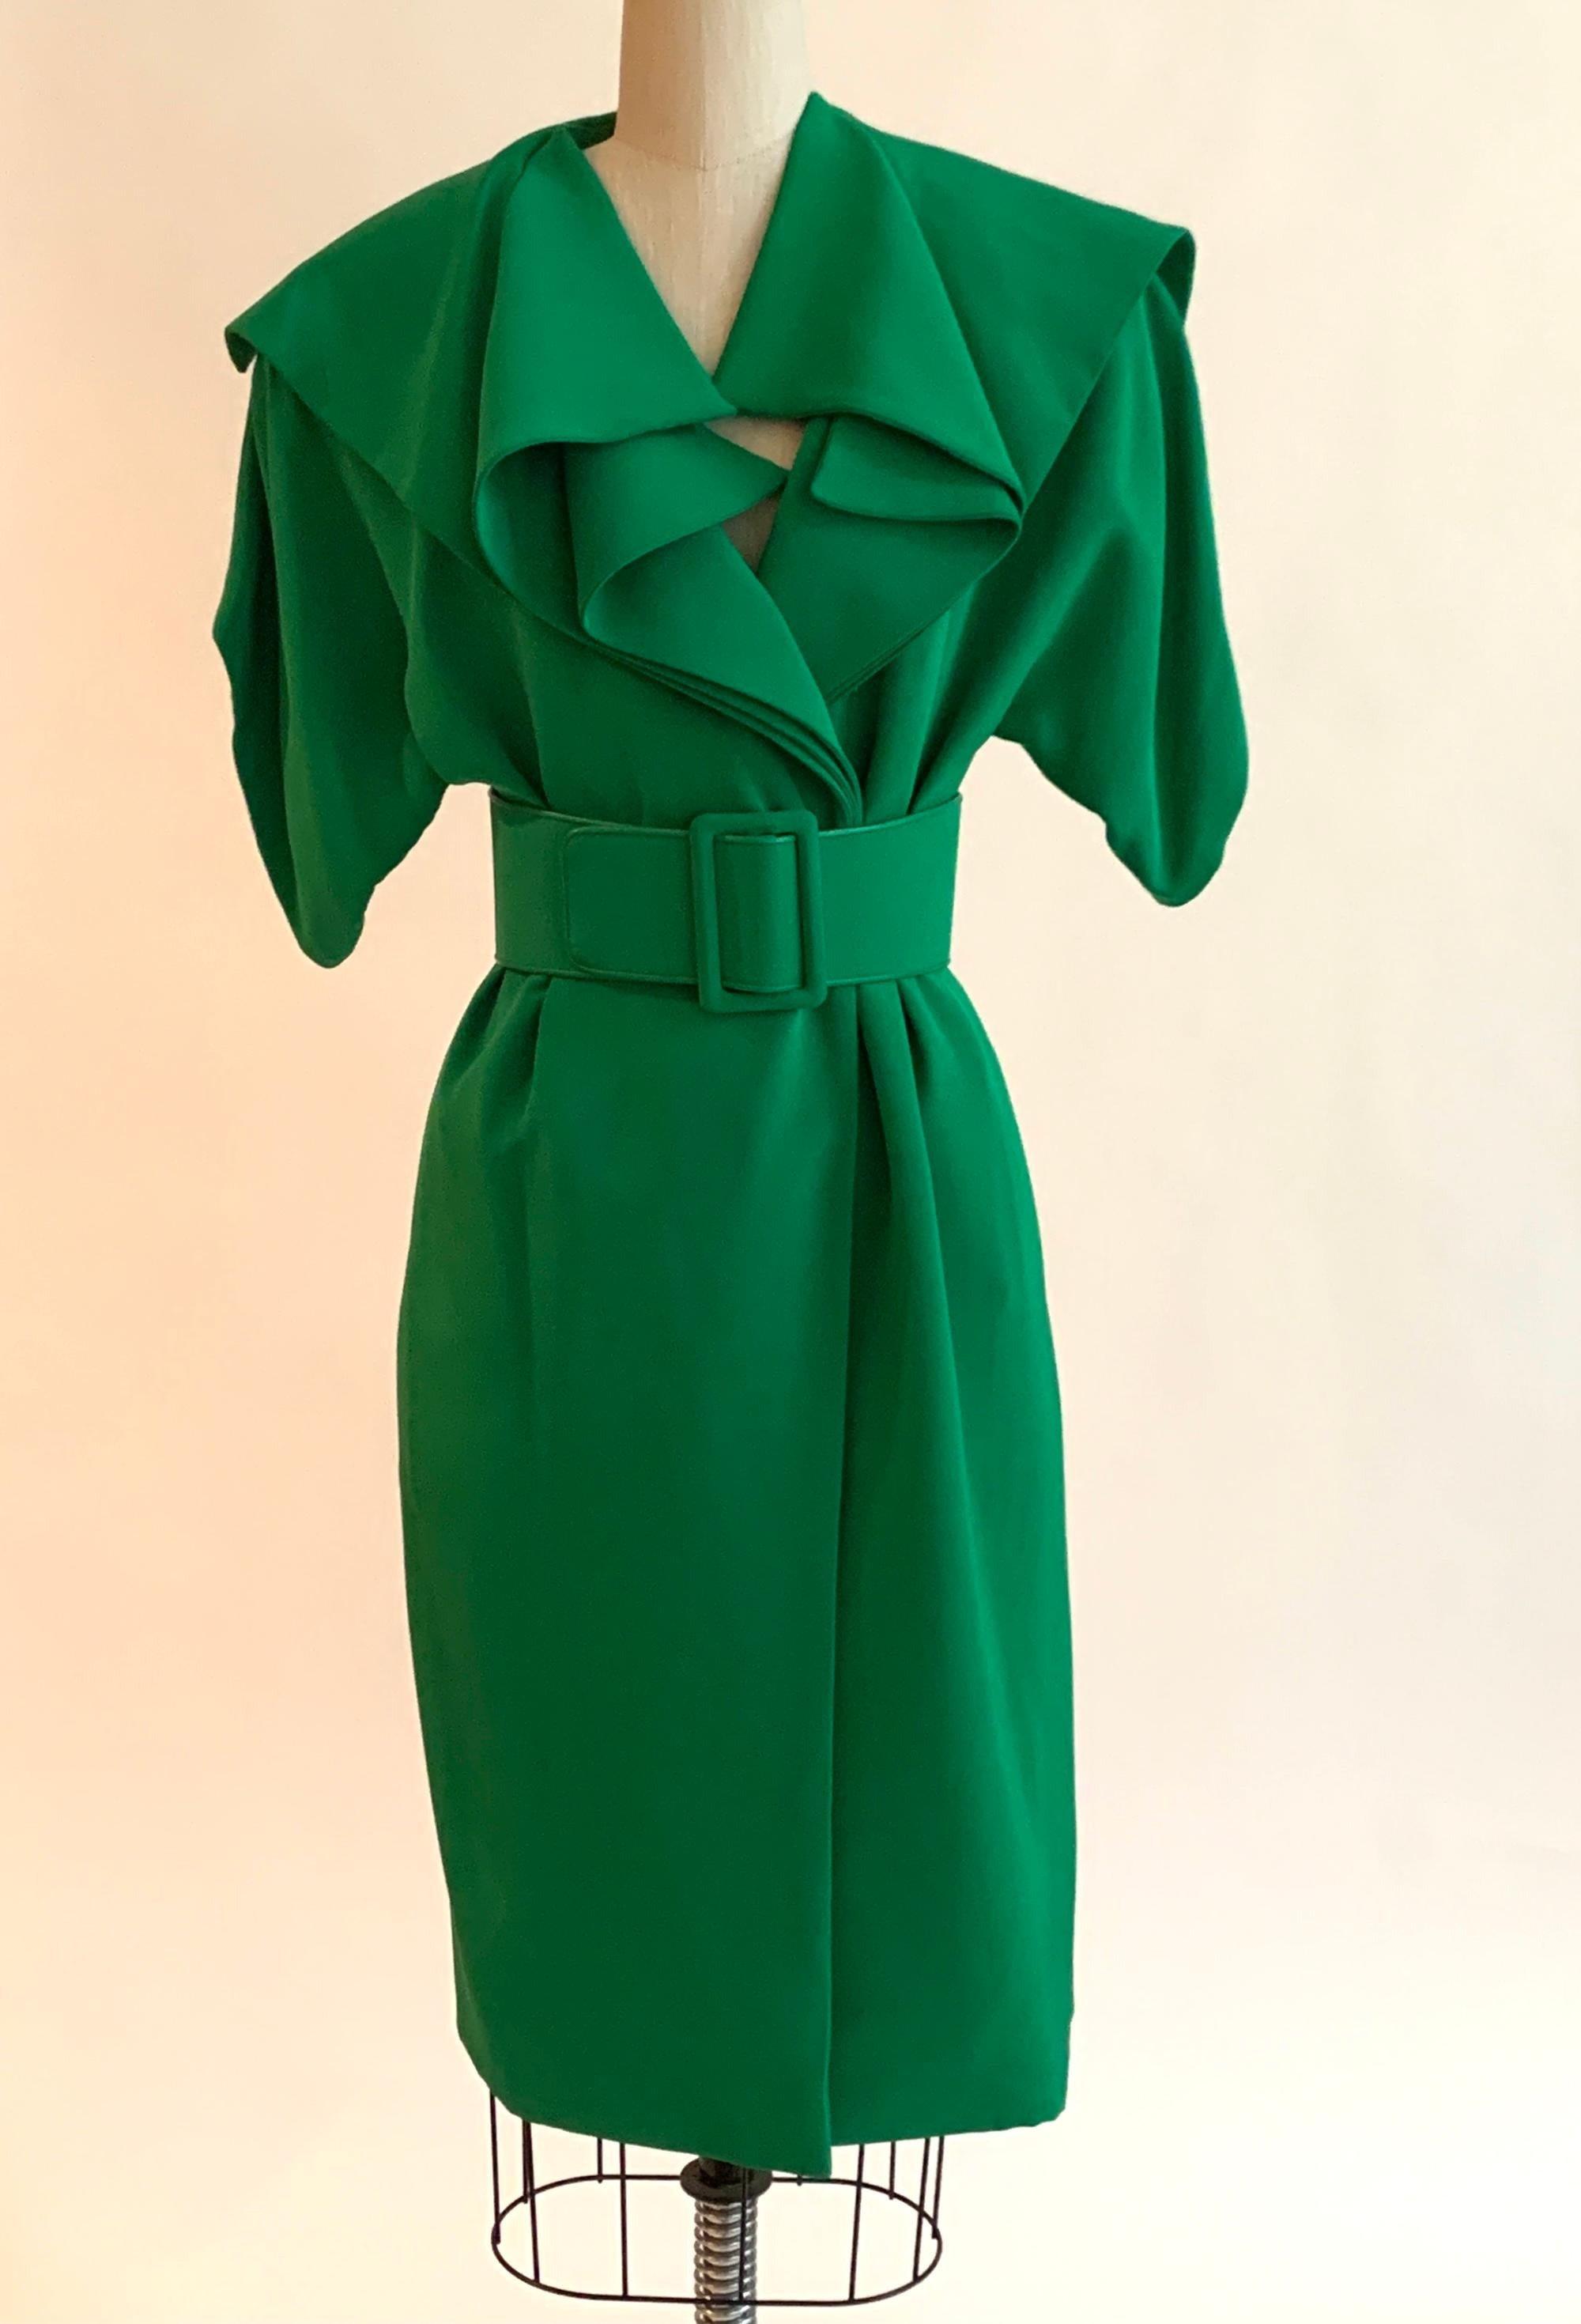 Vintage James Galanos kelly green coat dress with a beautifully draped shawl collar and short sleeves. Could be worn as a dress or as a coat. Fastens with three snaps near waist and belt. 

No content label, feels like a mid-weight silky fabric.